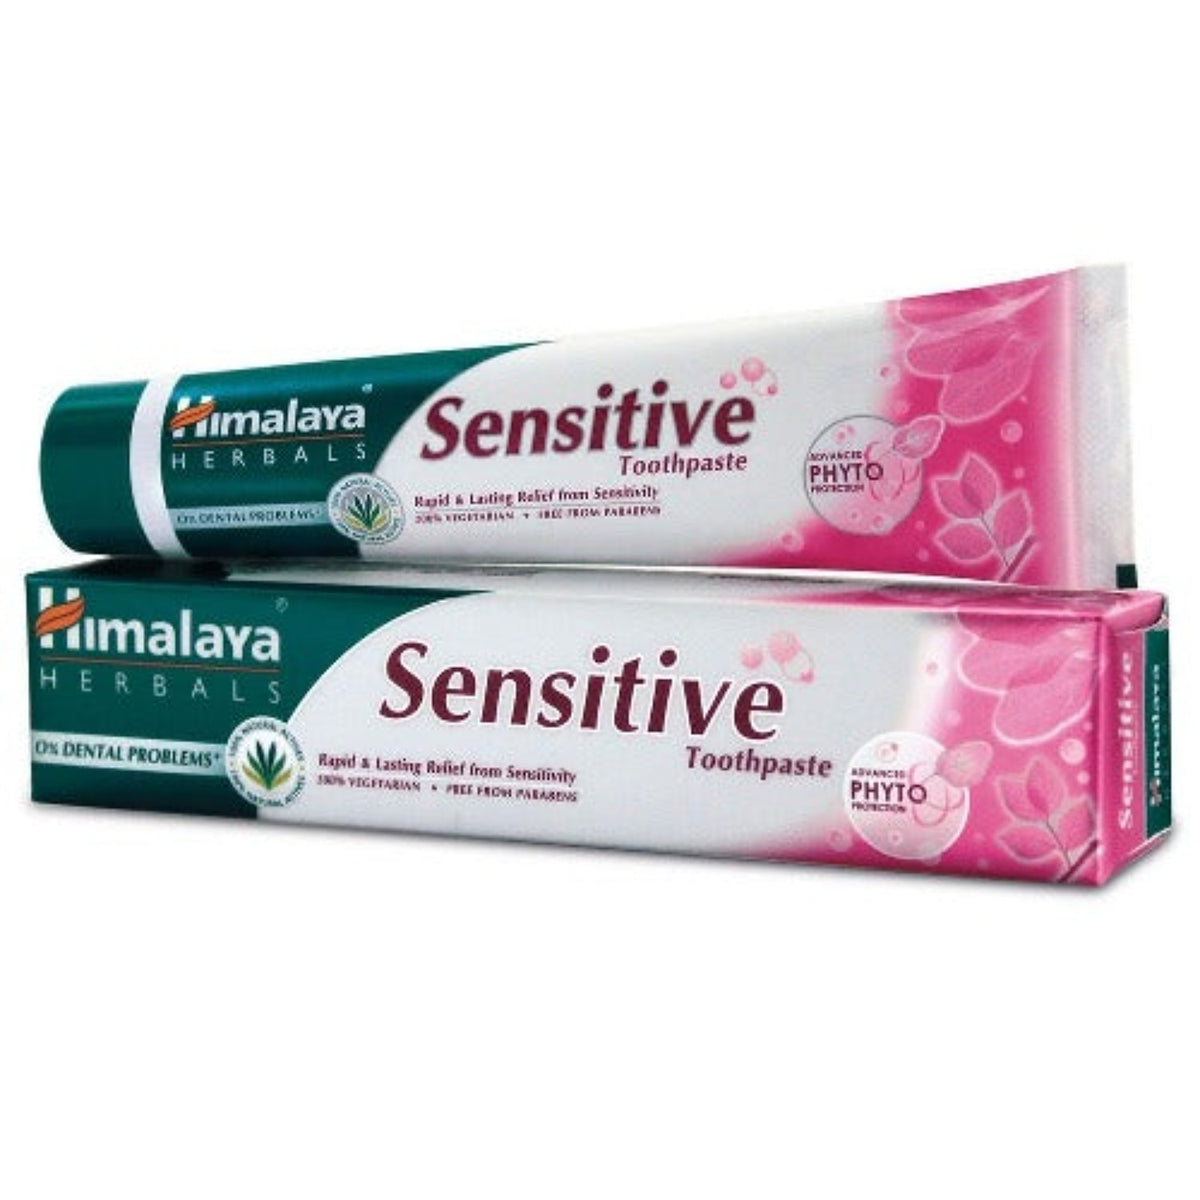 Himalaya Herbal Ayurvedic Sensitive Rapid And Lasting Relief From Sensitivity Toothpaste 80 g